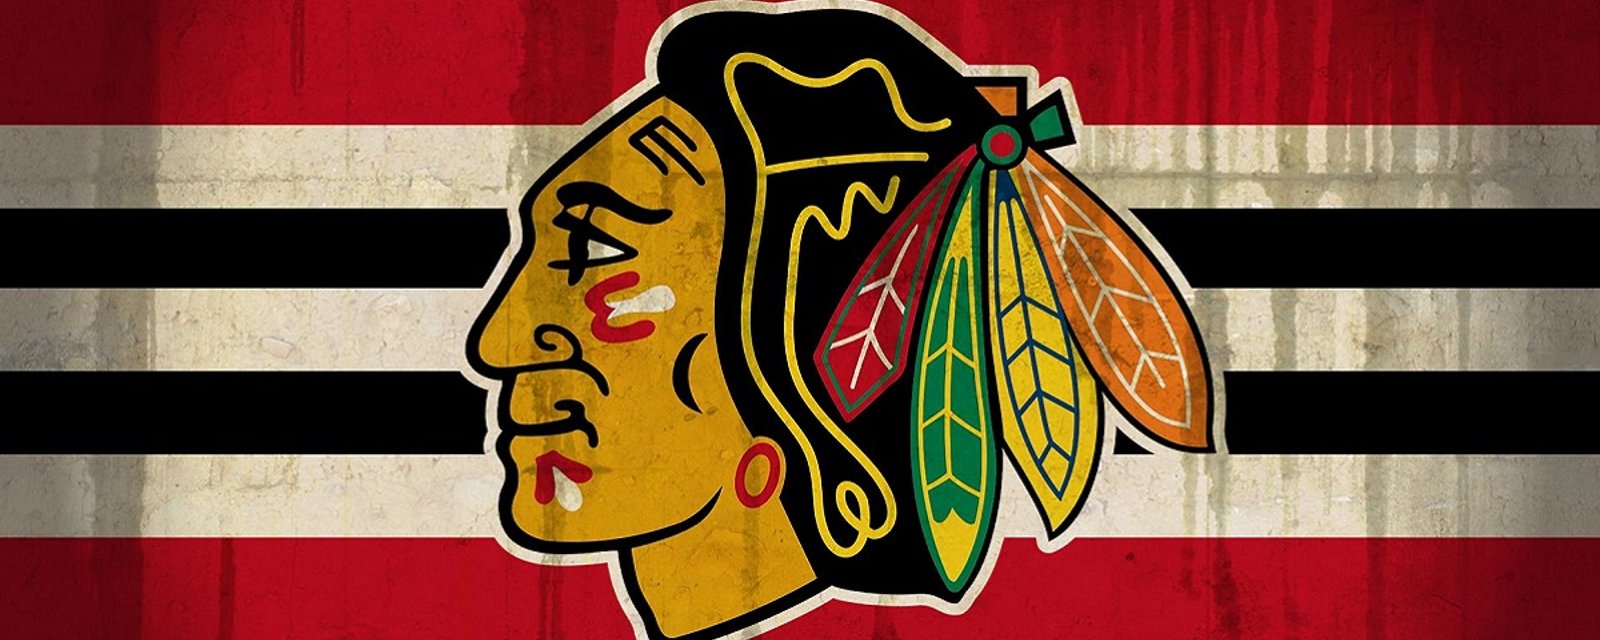 Breaking: Blackhawks attempting to sign controversial forward!